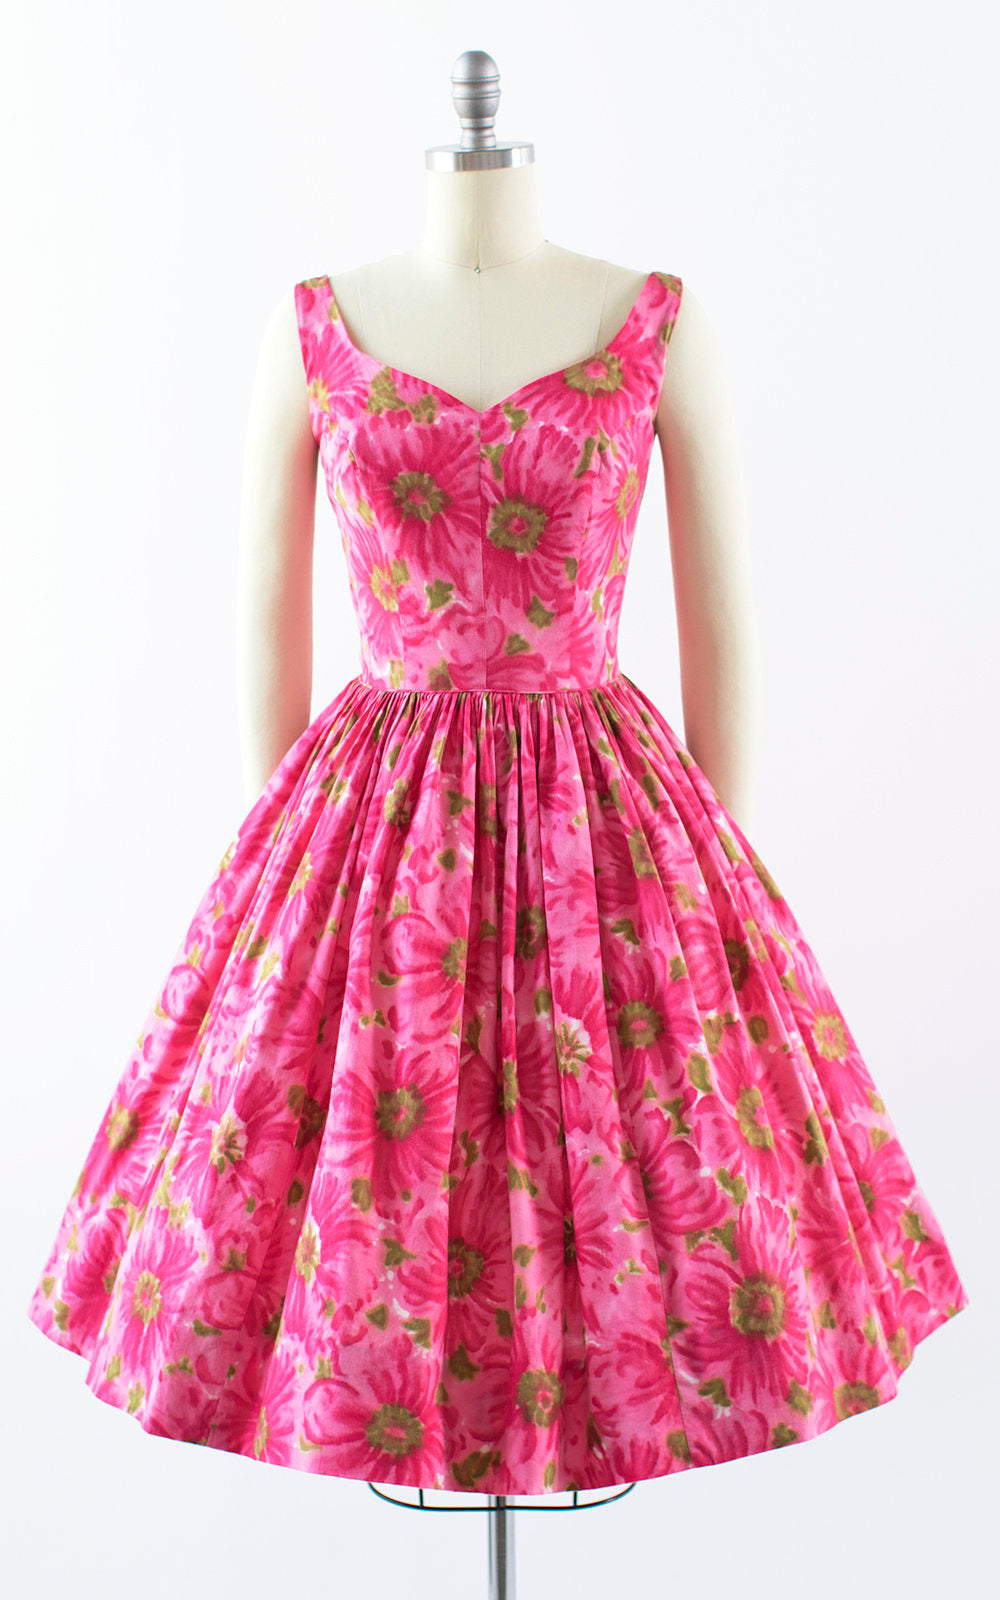 Vintage 1950s Dress | 50s Hot Pink Floral Cotton Sundress Full Skirt Day Dress (x-small)